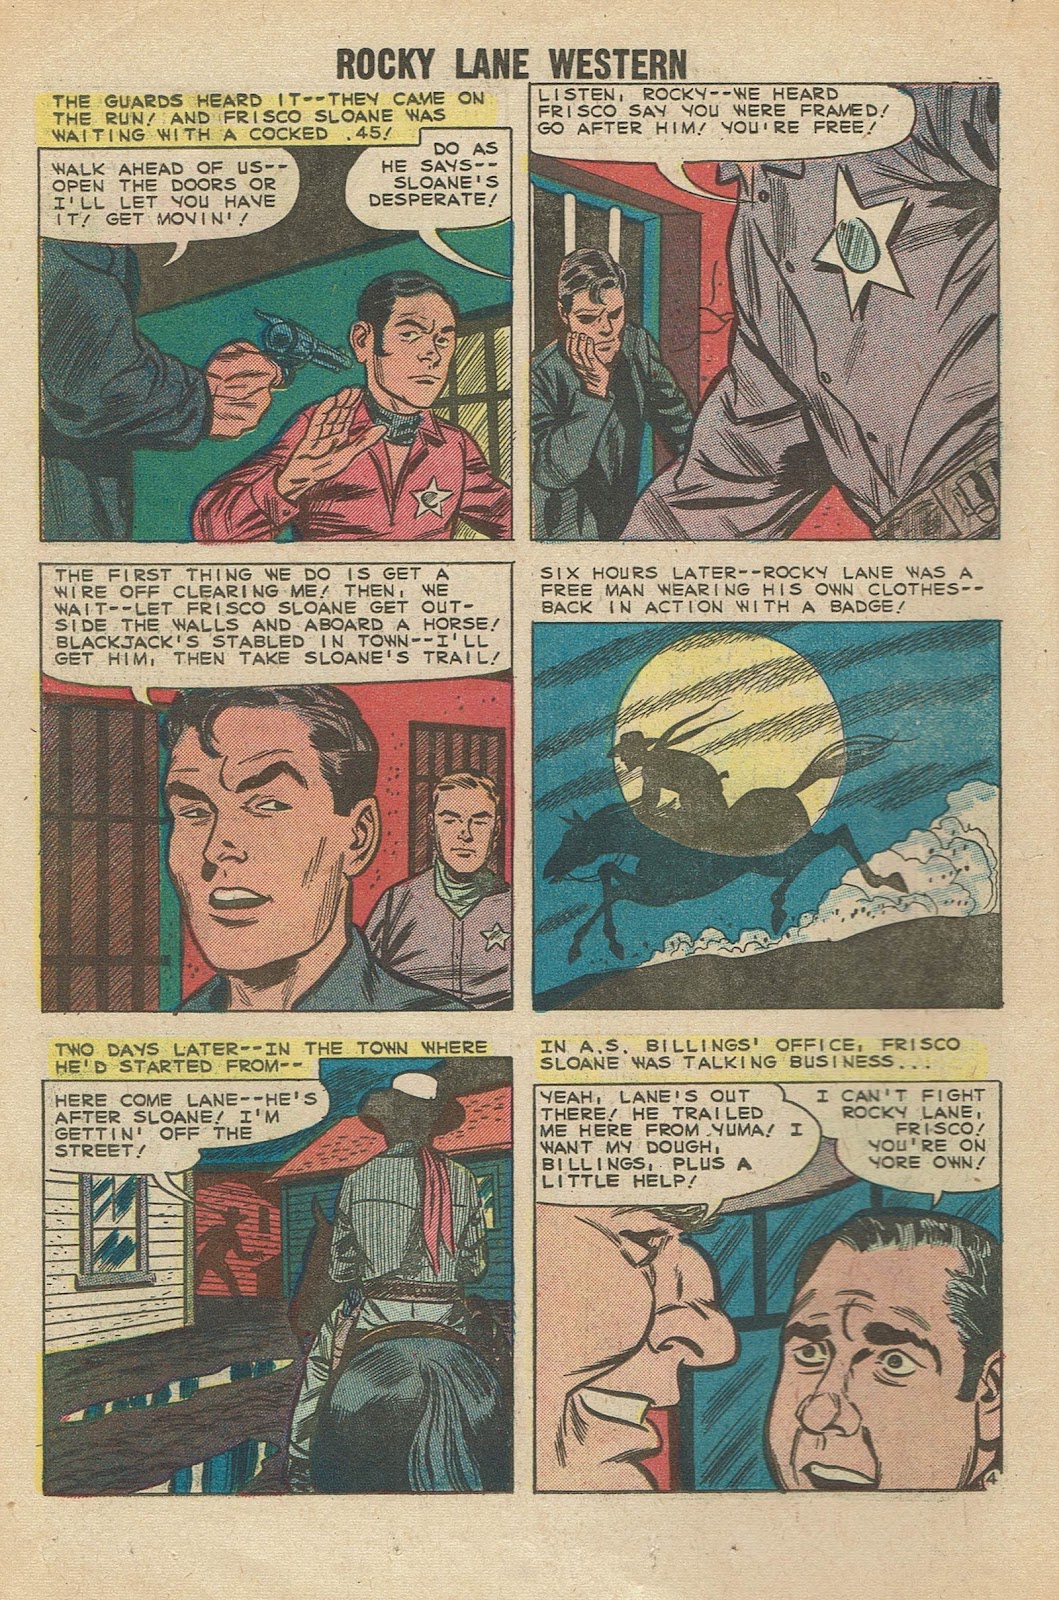 Rocky Lane Western (1954) issue 85 - Page 18